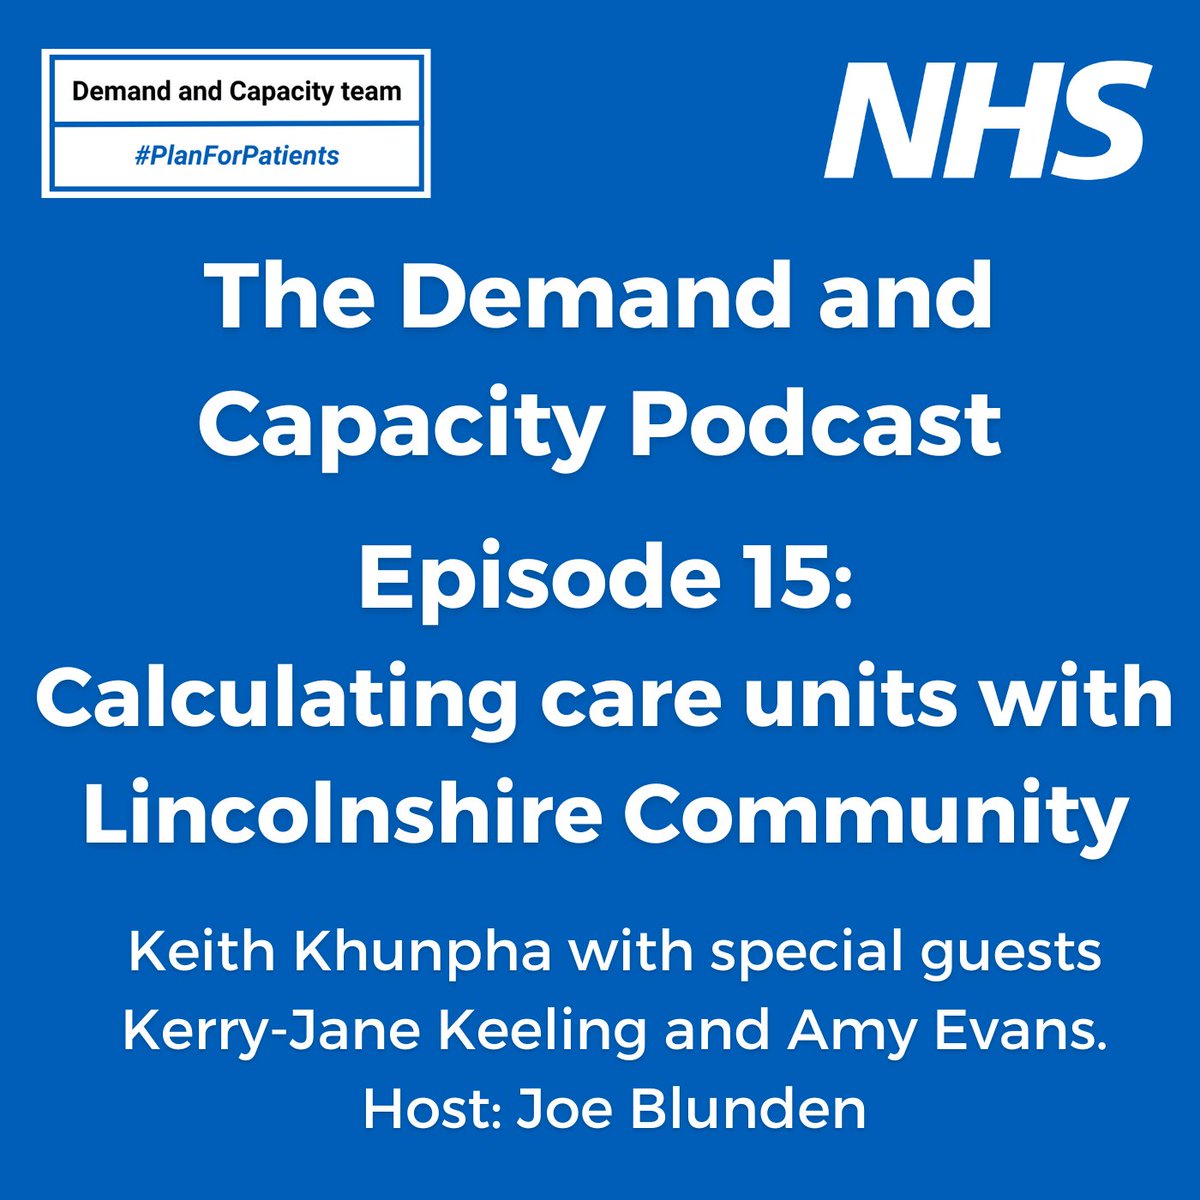 🎧 the latest demand and capacity podcast now available. Fantastic to hear about more great work in community services @LincsCommHealth Thanks to @NHSCommsJoe @NHSElect for hosting open.spotify.com/episode/3g1AiV…